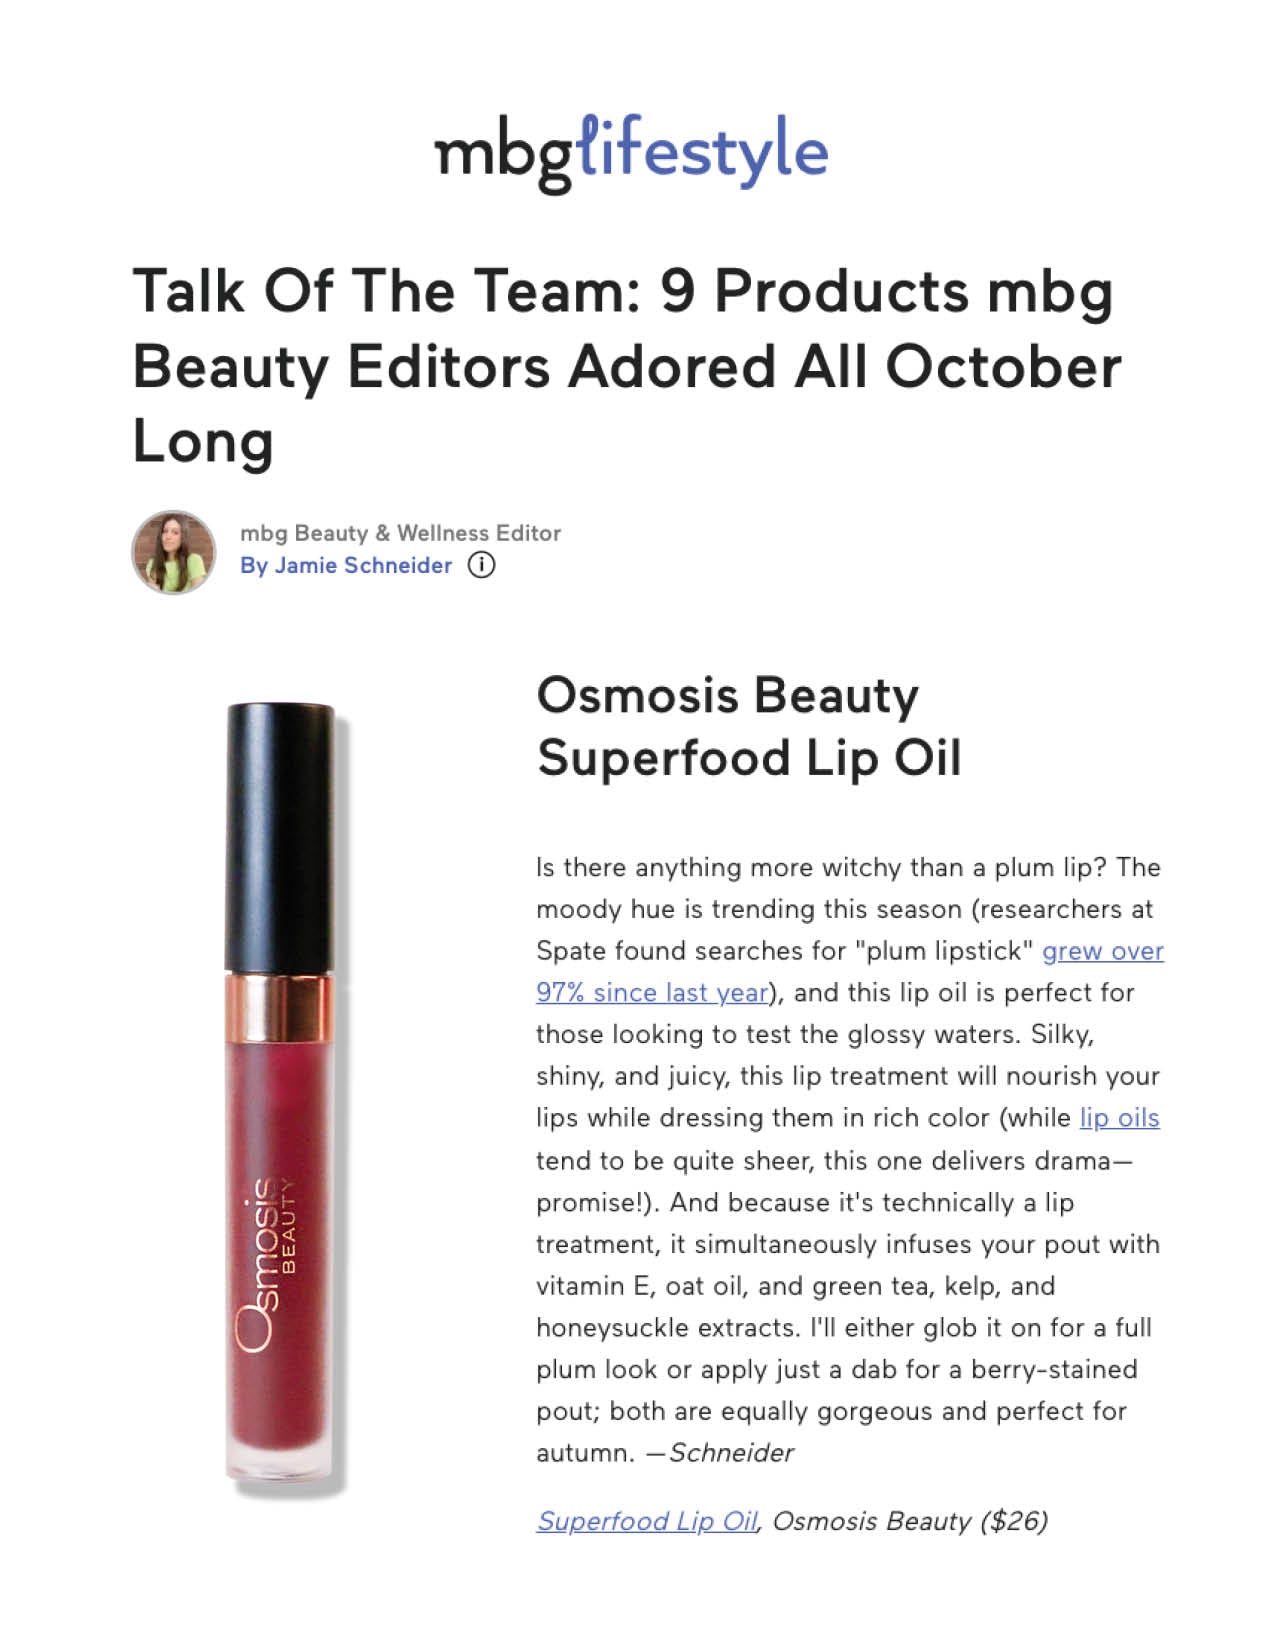 The Superfood Lip Oil was featured in a roundup on Mind Body Green of the editors favorite products for October